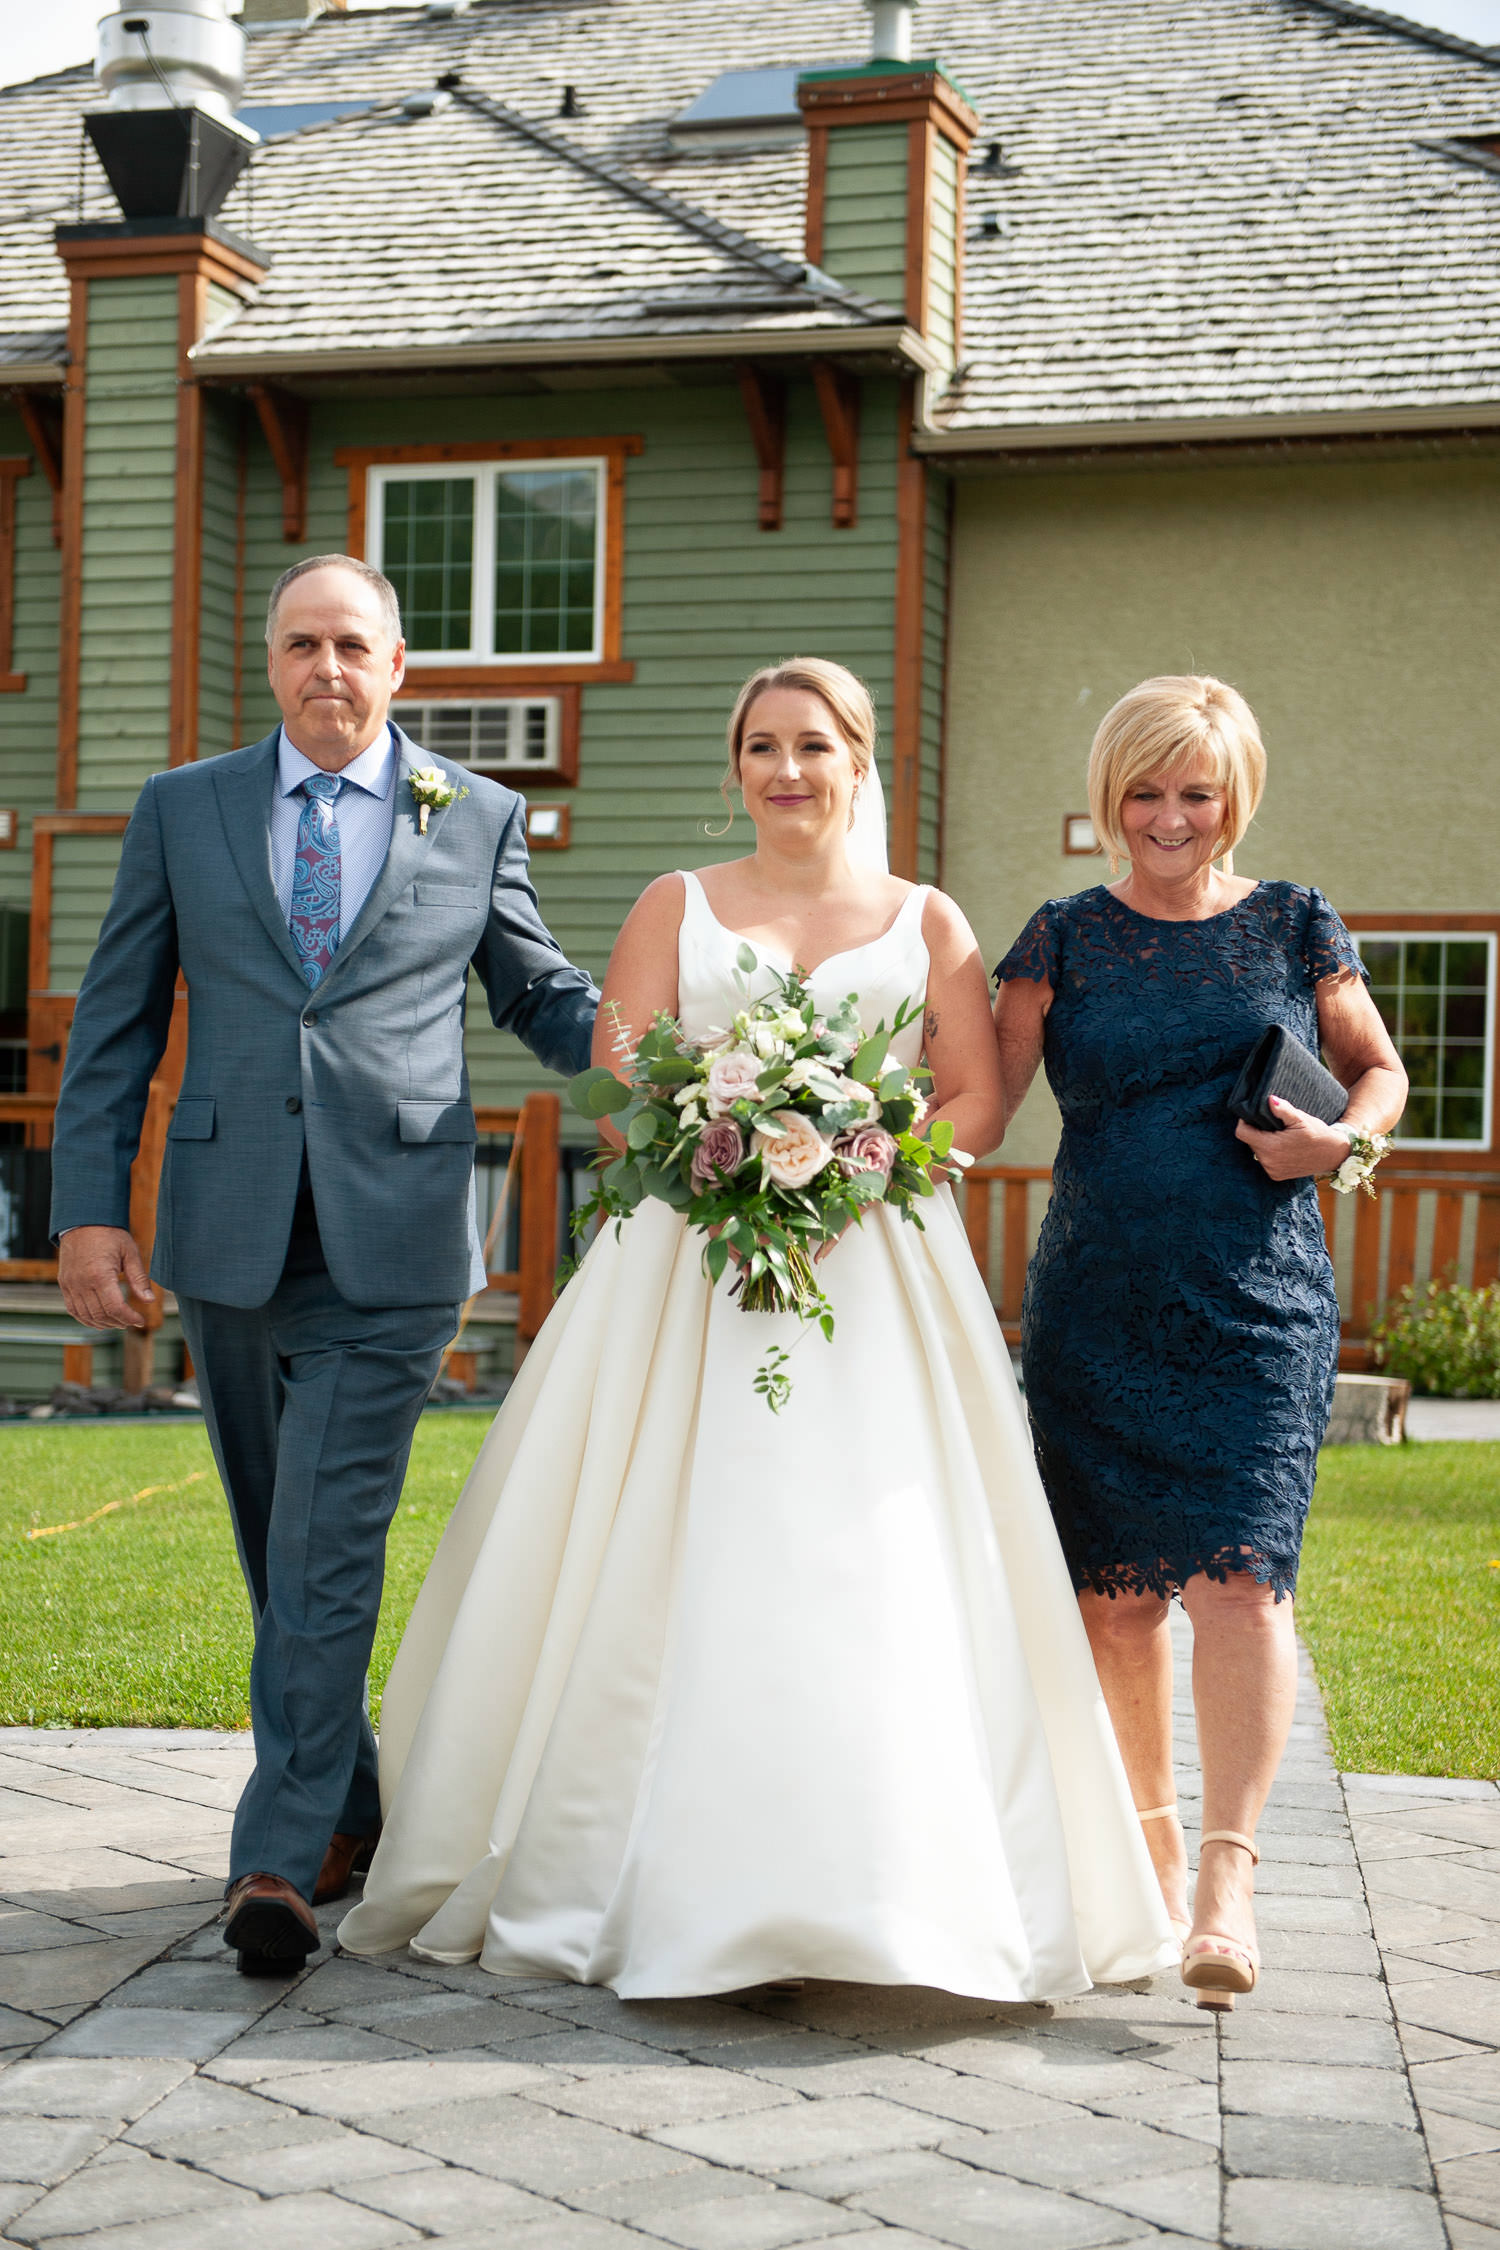 Bride walks down the aisle at her Creekside Villa wedding captured by Tara Whittaker Photography